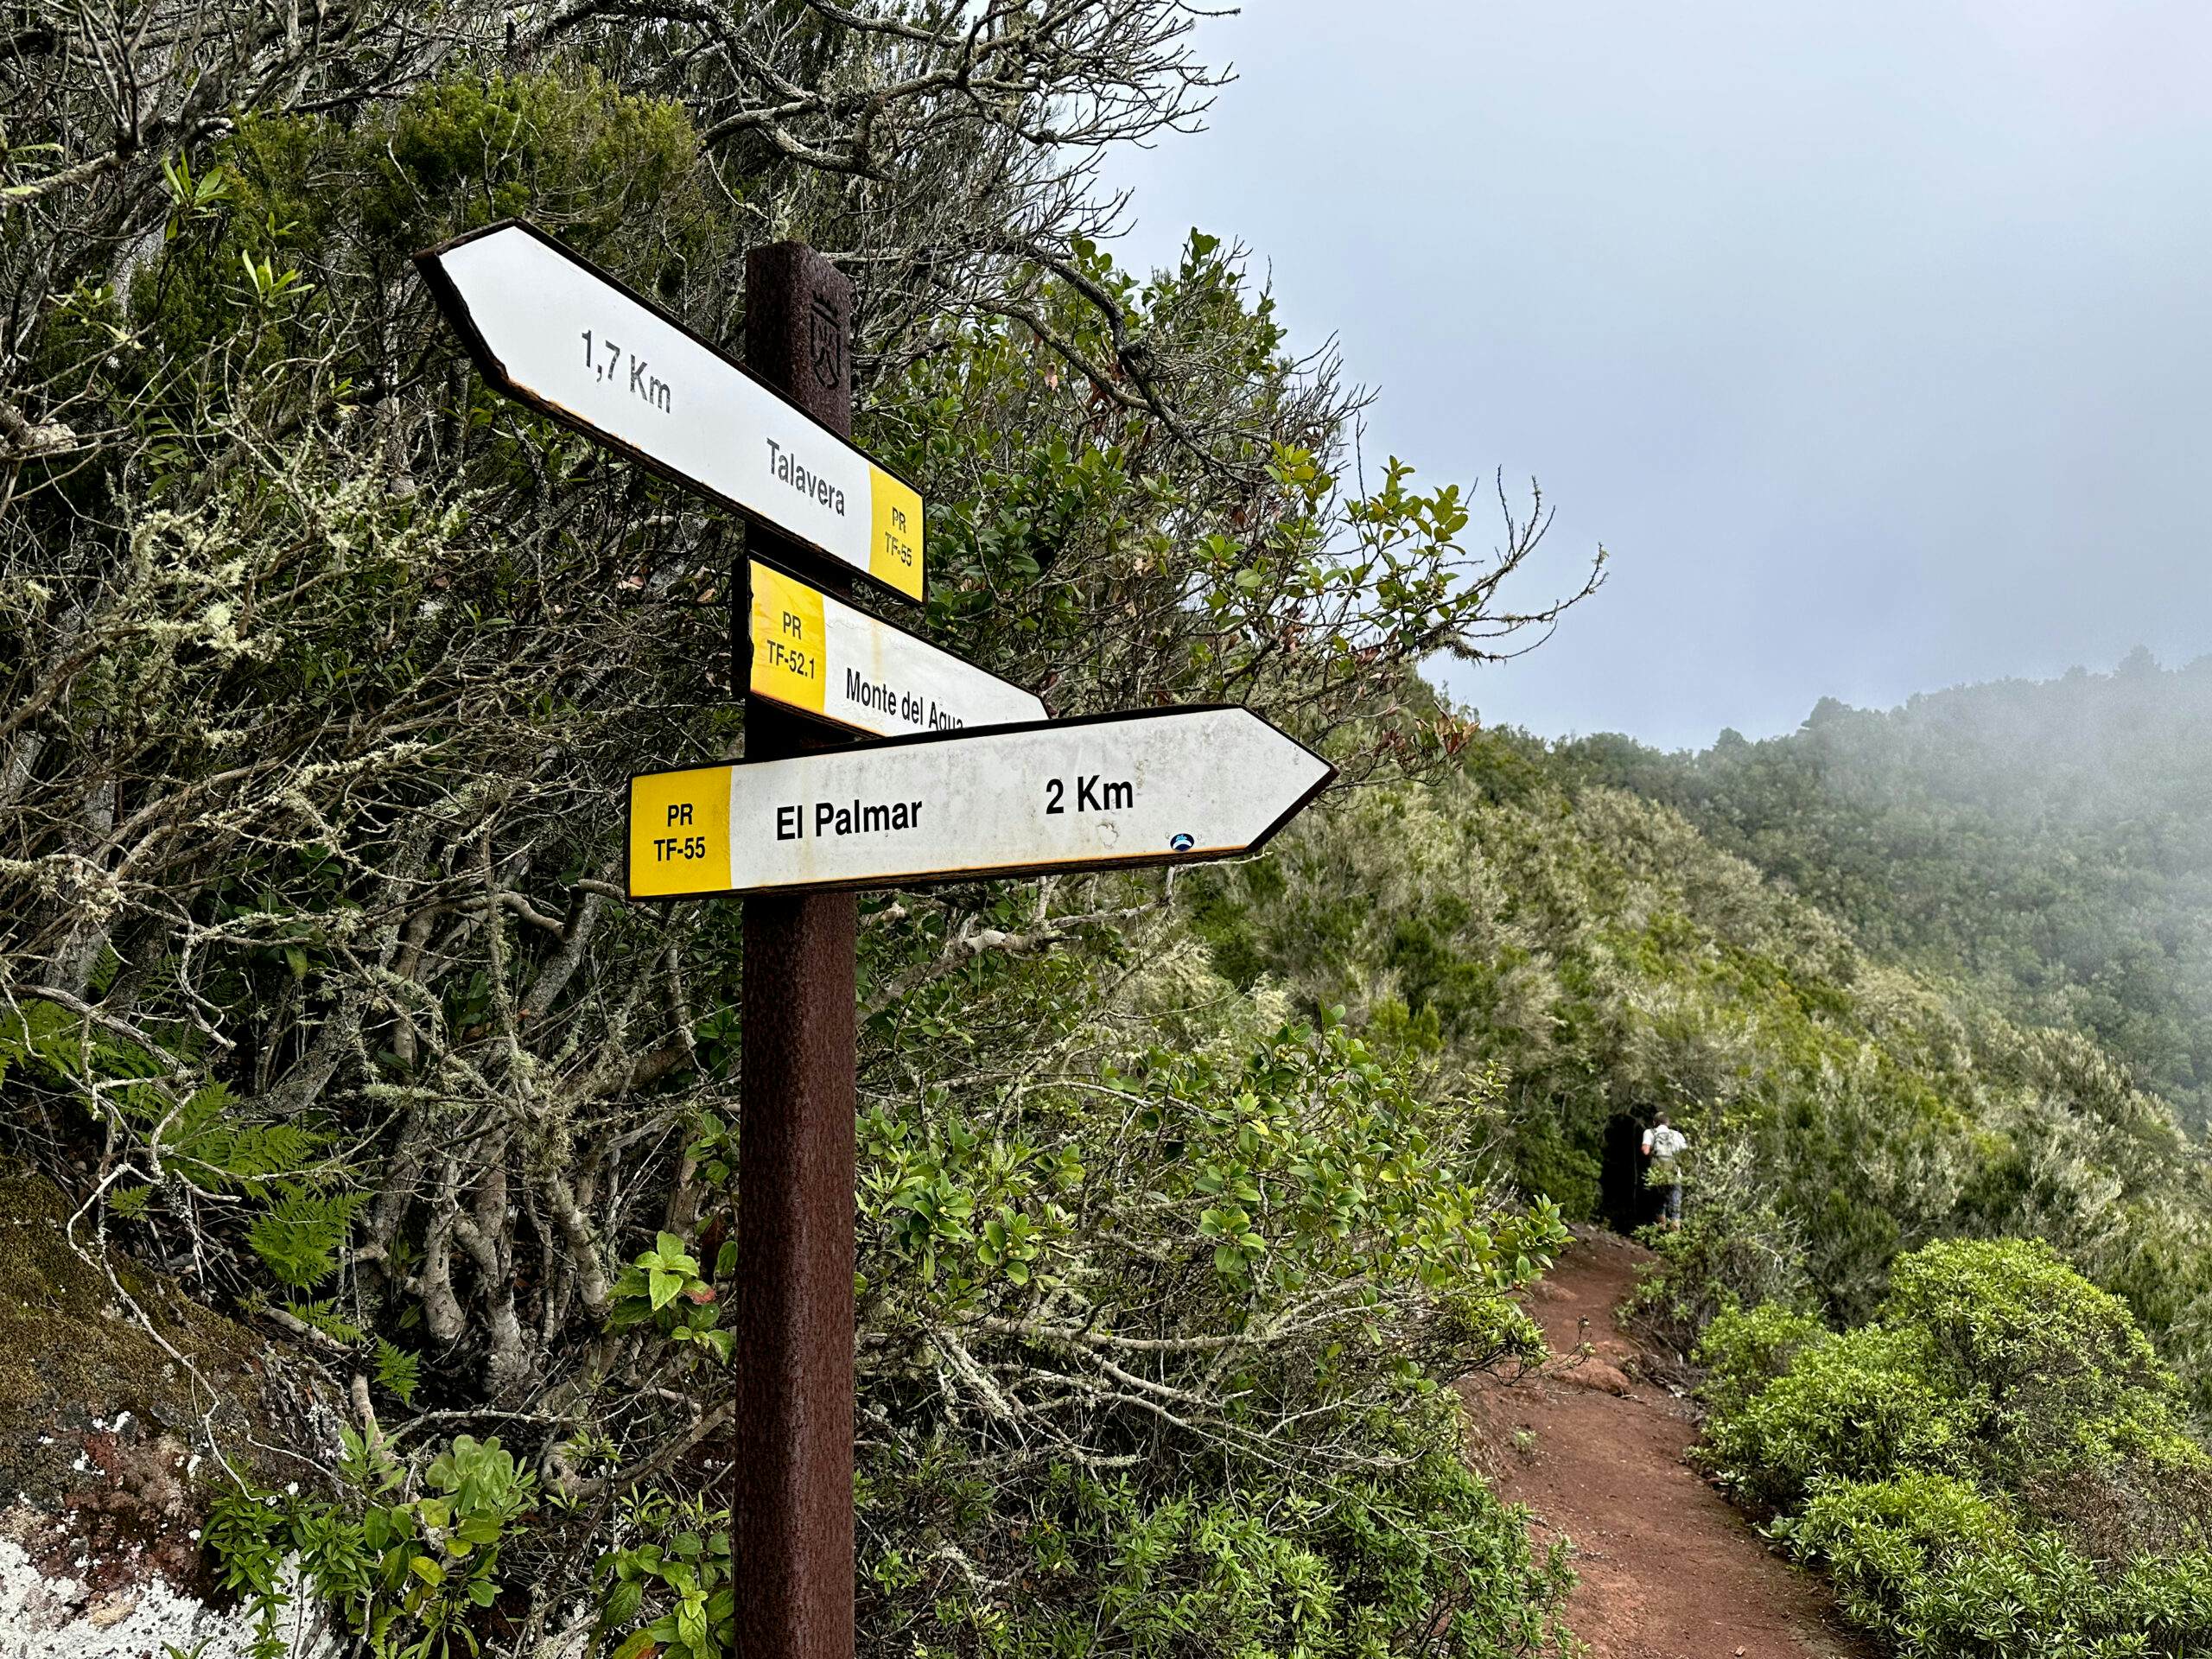 Hiking trails TF 52.1 and TF-55 cross high above El Palmar